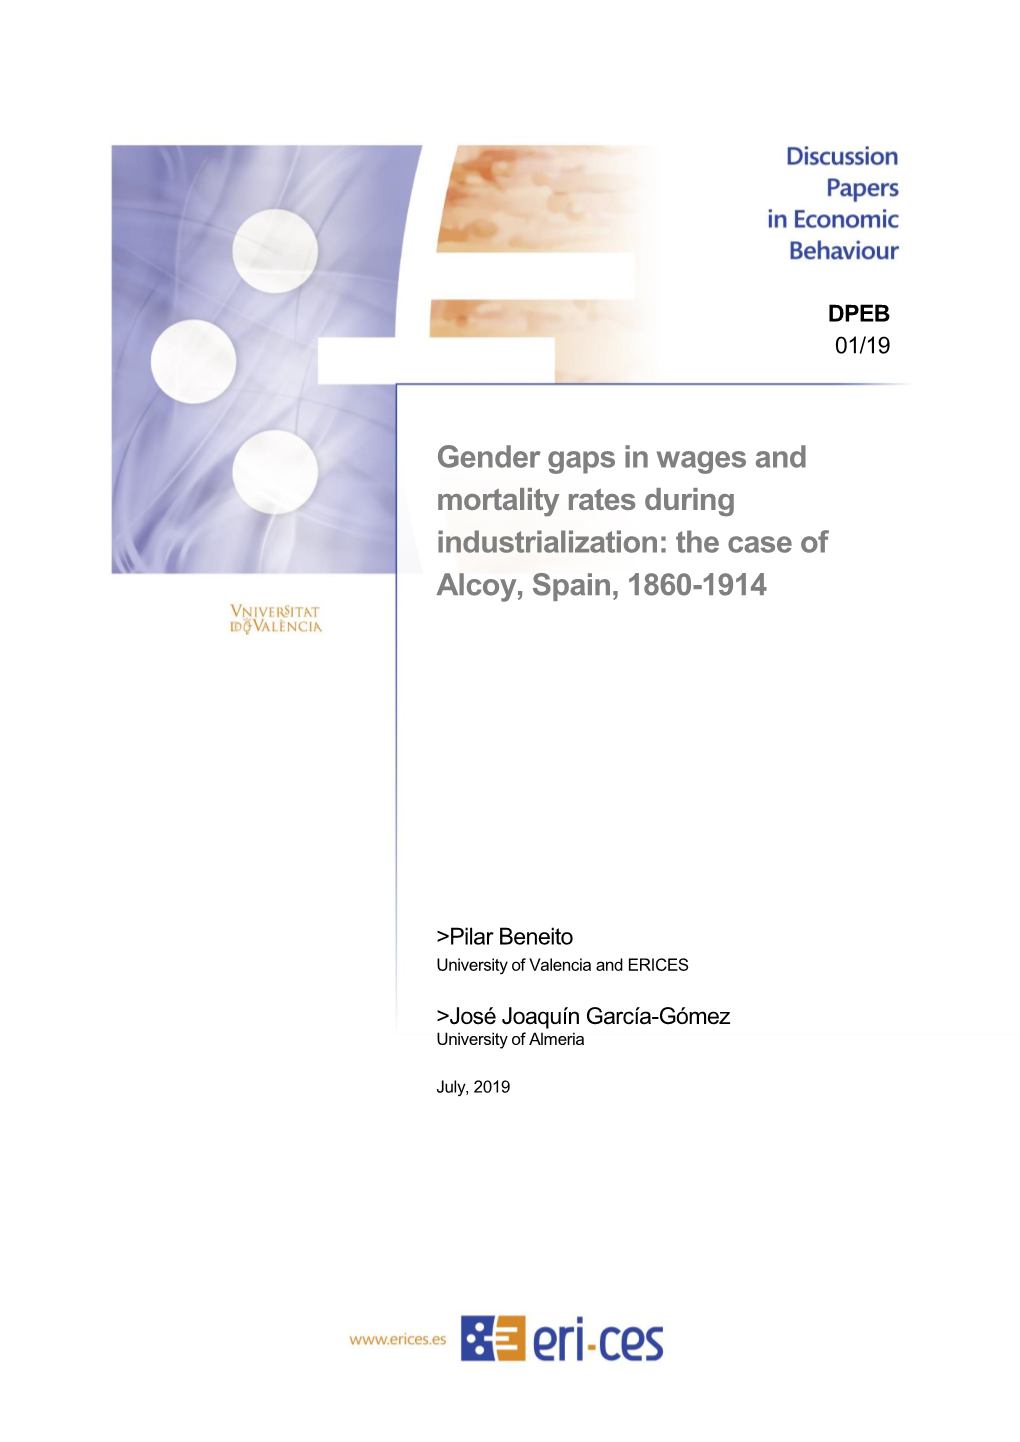 Gender Gaps in Wages and Mortality Rates During Industrialization: the Case of Alcoy, Spain, 1860-1914